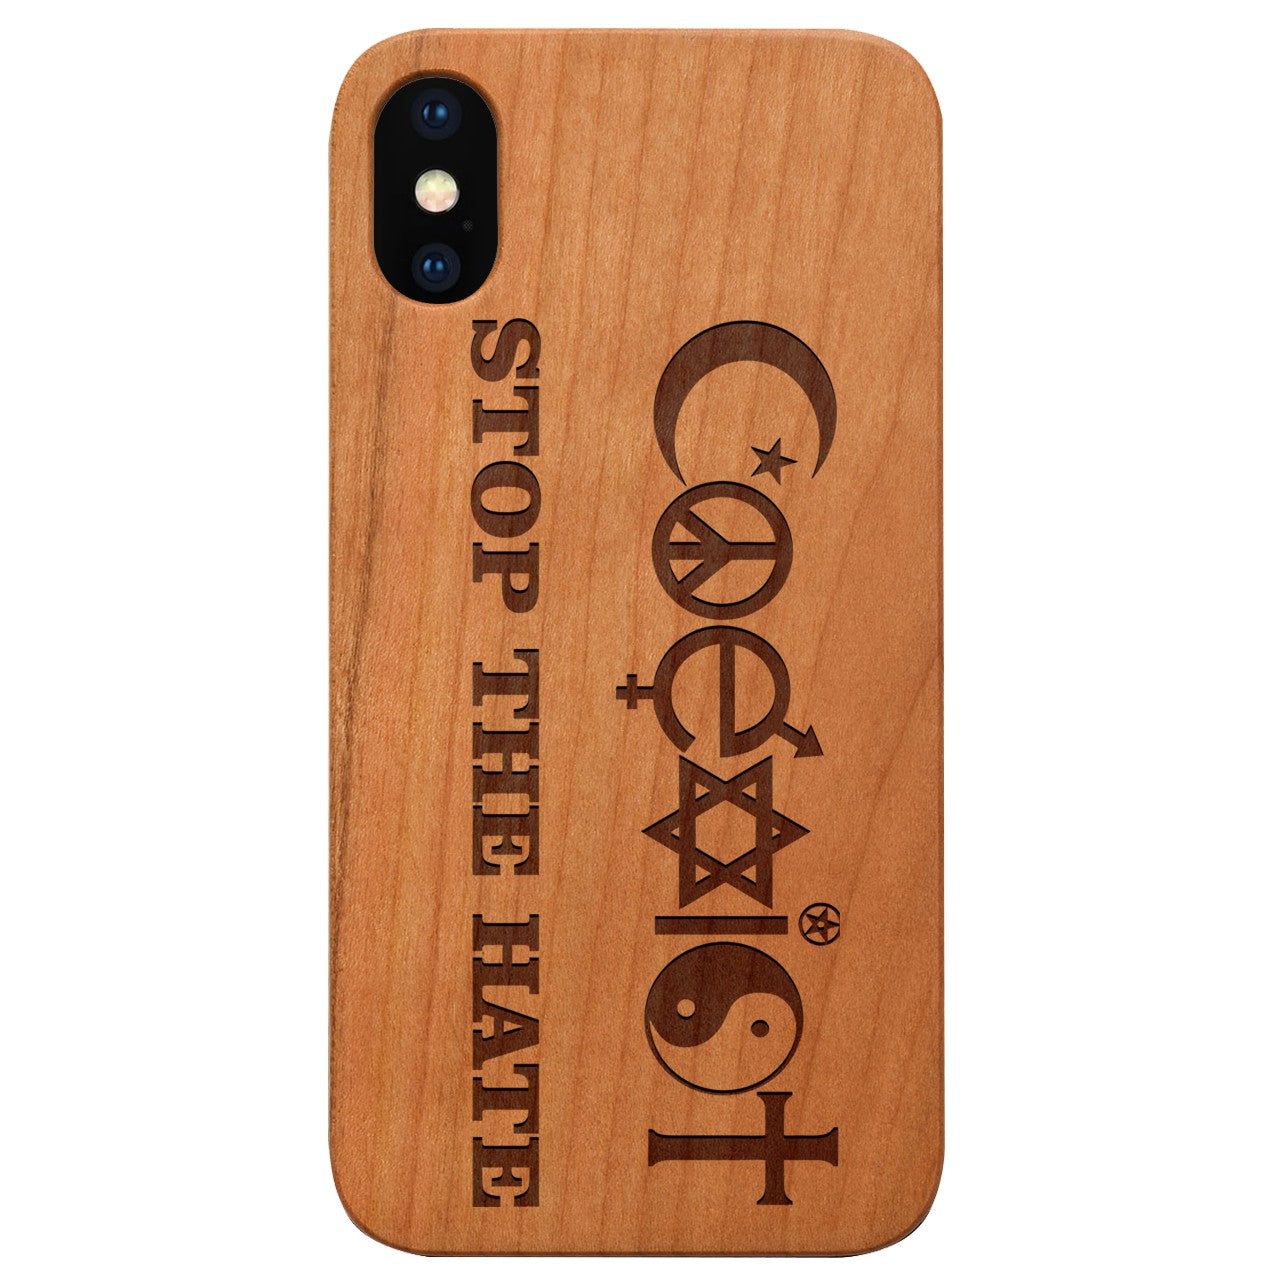  Coexist - Engraved - Wooden Phone Case - IPhone 13 Models